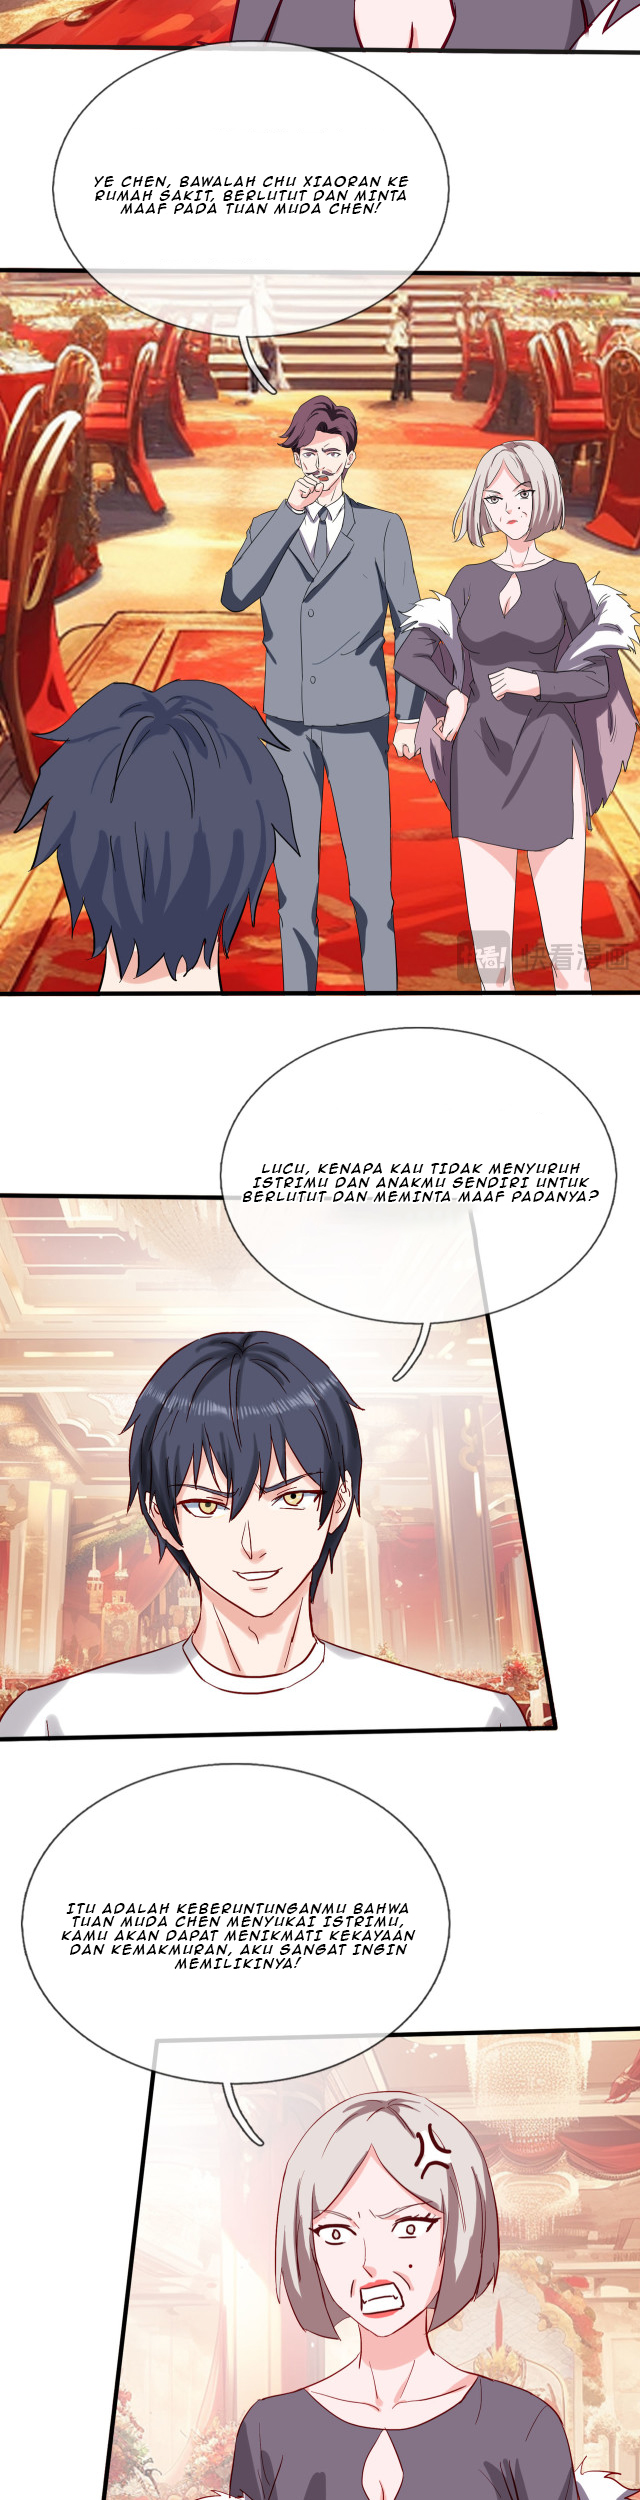 Rebirth Of The Immortal Arrogant Son-in-law Chapter 7